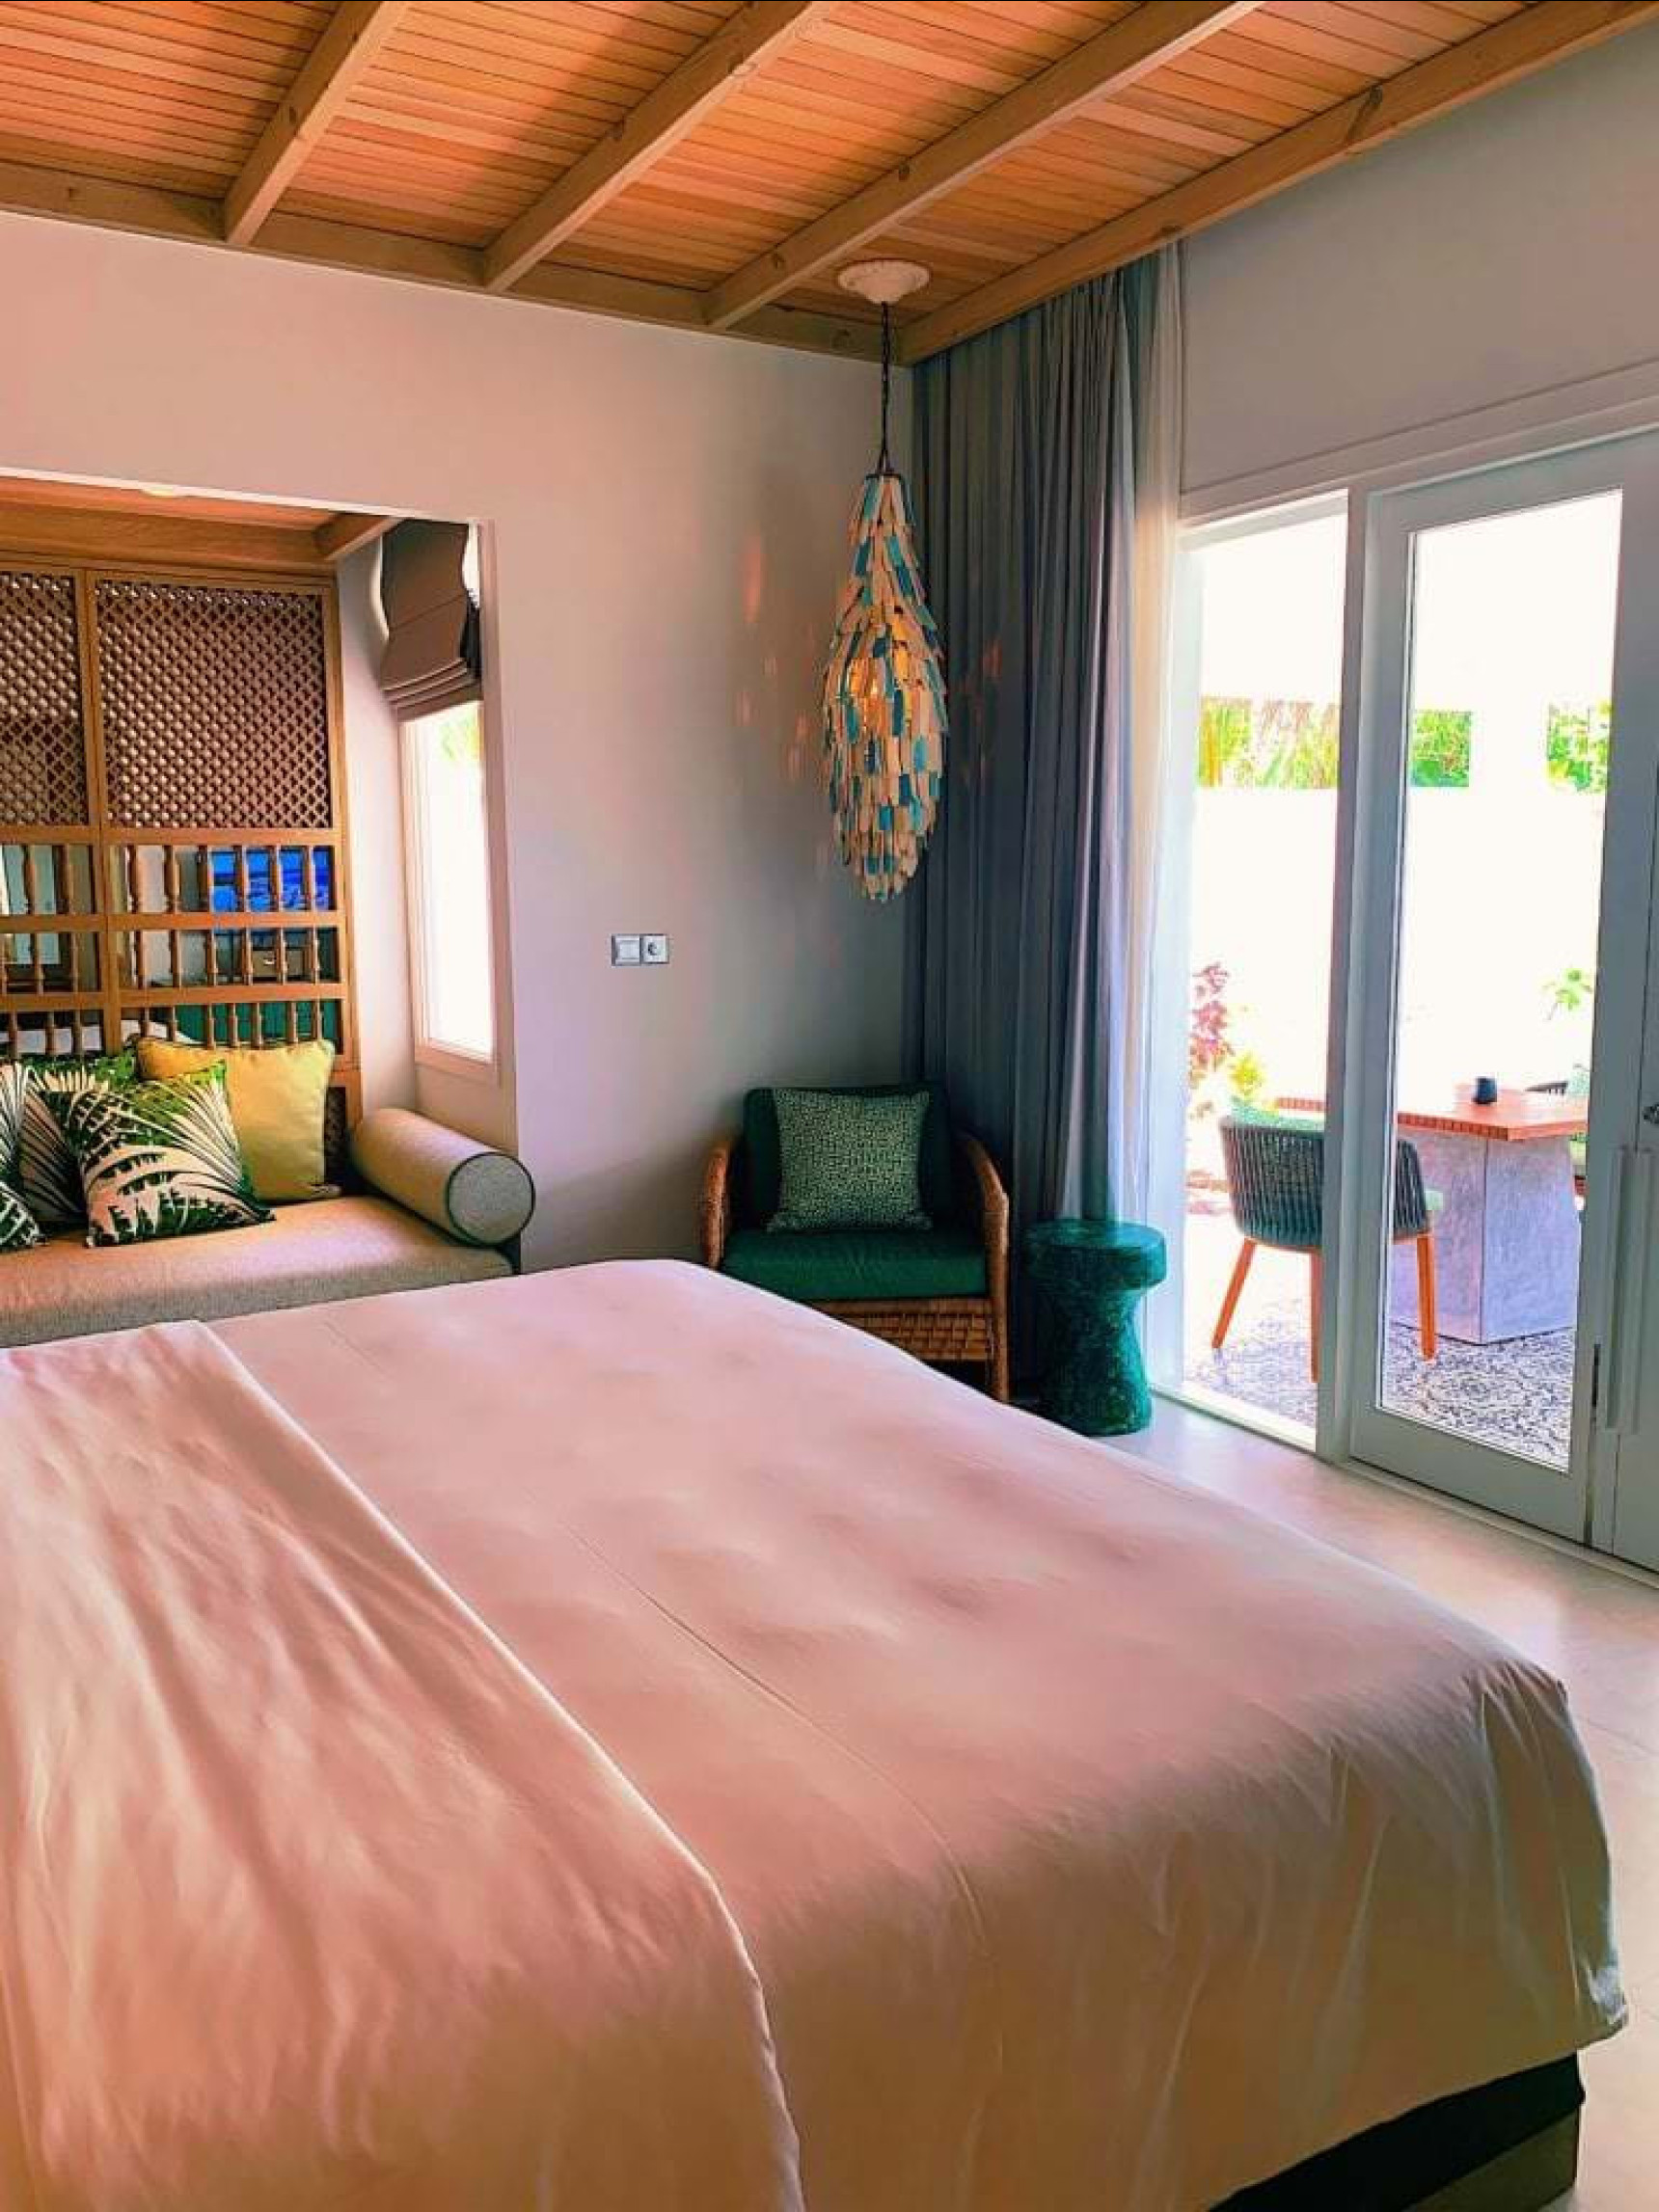 A sneak-peak into one of the bedrooms at Finolhu